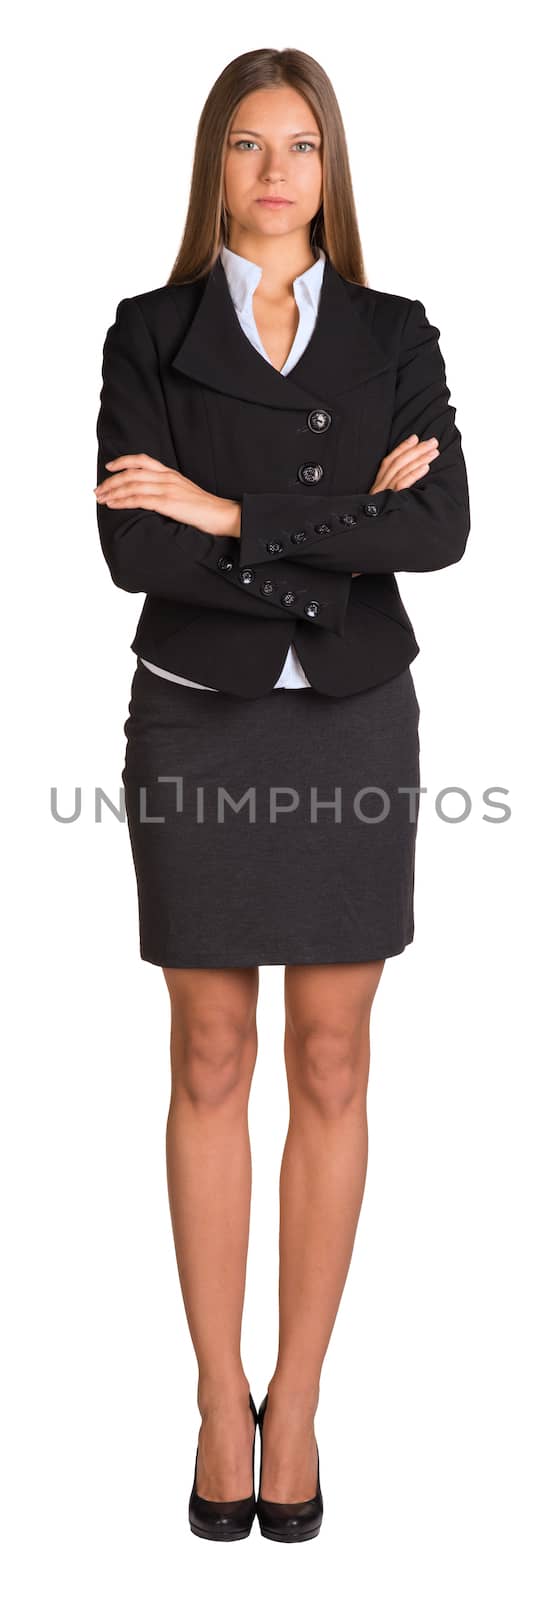 Businesswoman with crossed arms. Isolated on white background